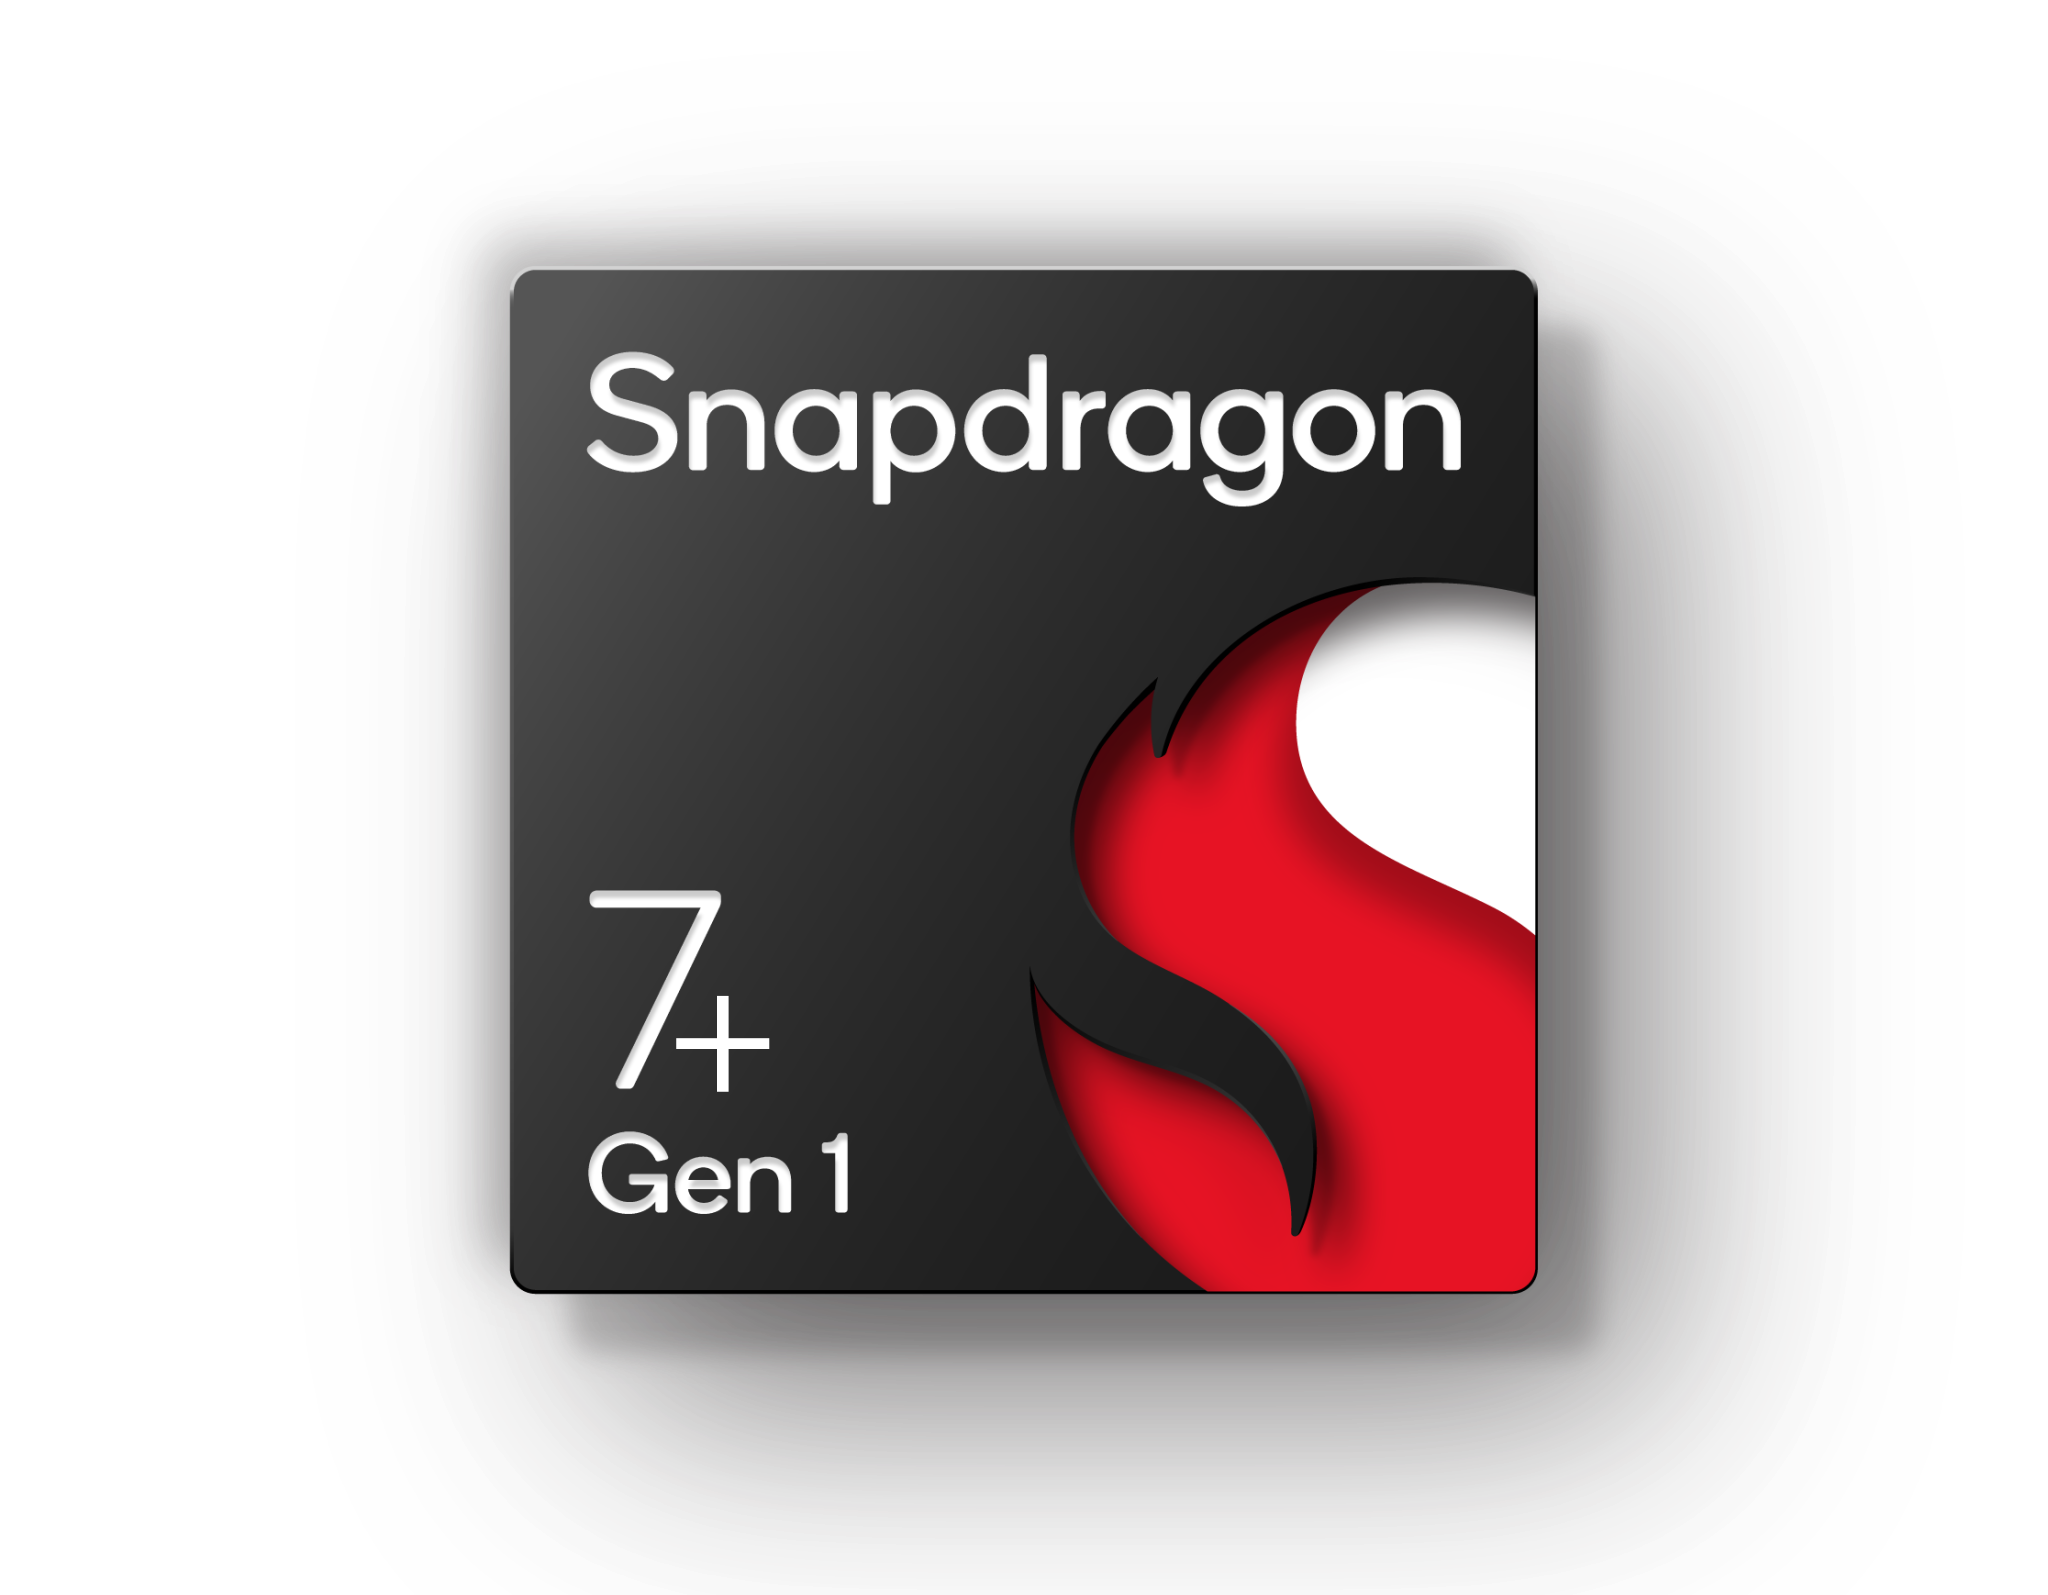 Qualcomm could soon launch a Snapdragon 7 Plus Gen 1 SoC with improved tri-cluster design